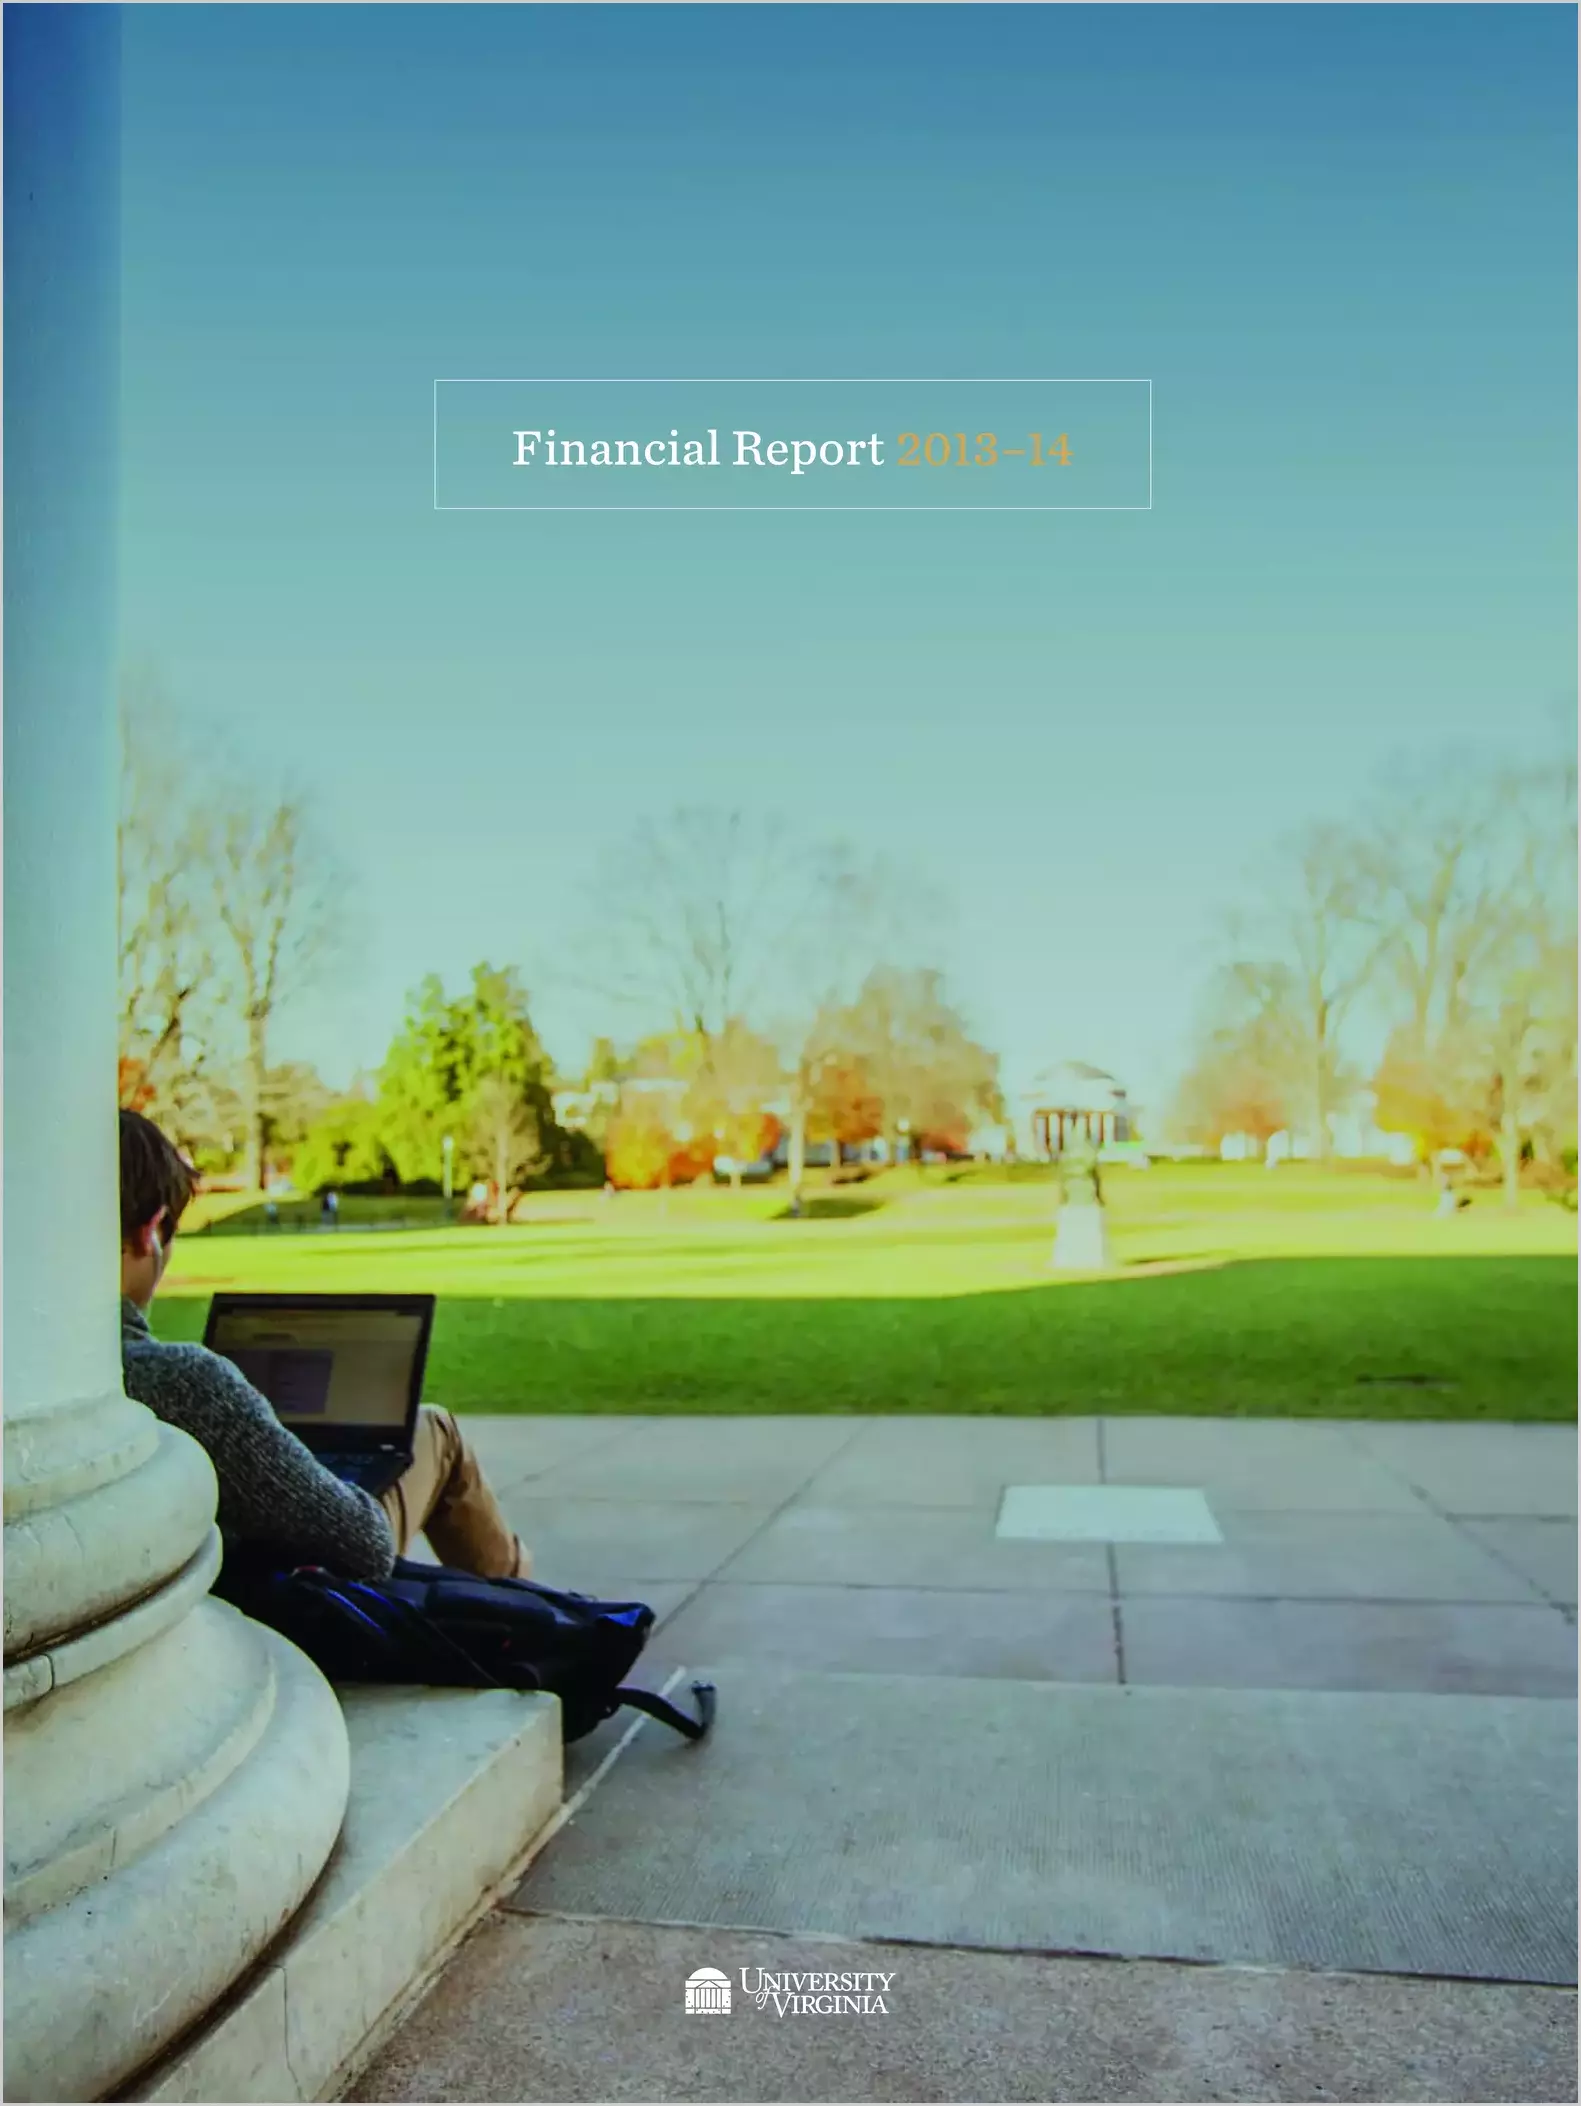 University of Virginia Financial Statements for the year ended June 30, 2014